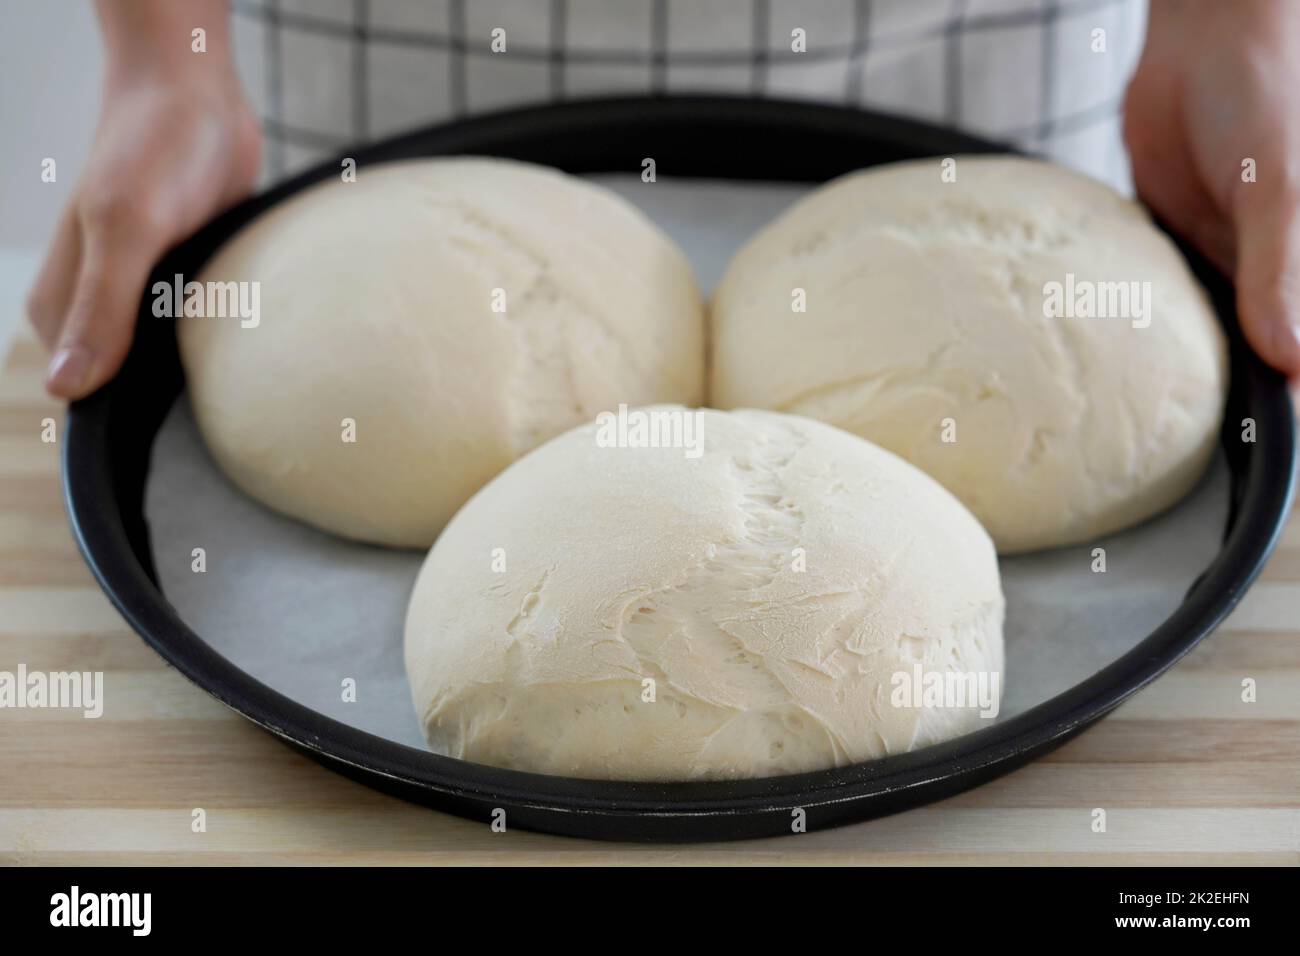 Woman showing three homemade loaves of bread in baking tray ready to be baked Stock Photo